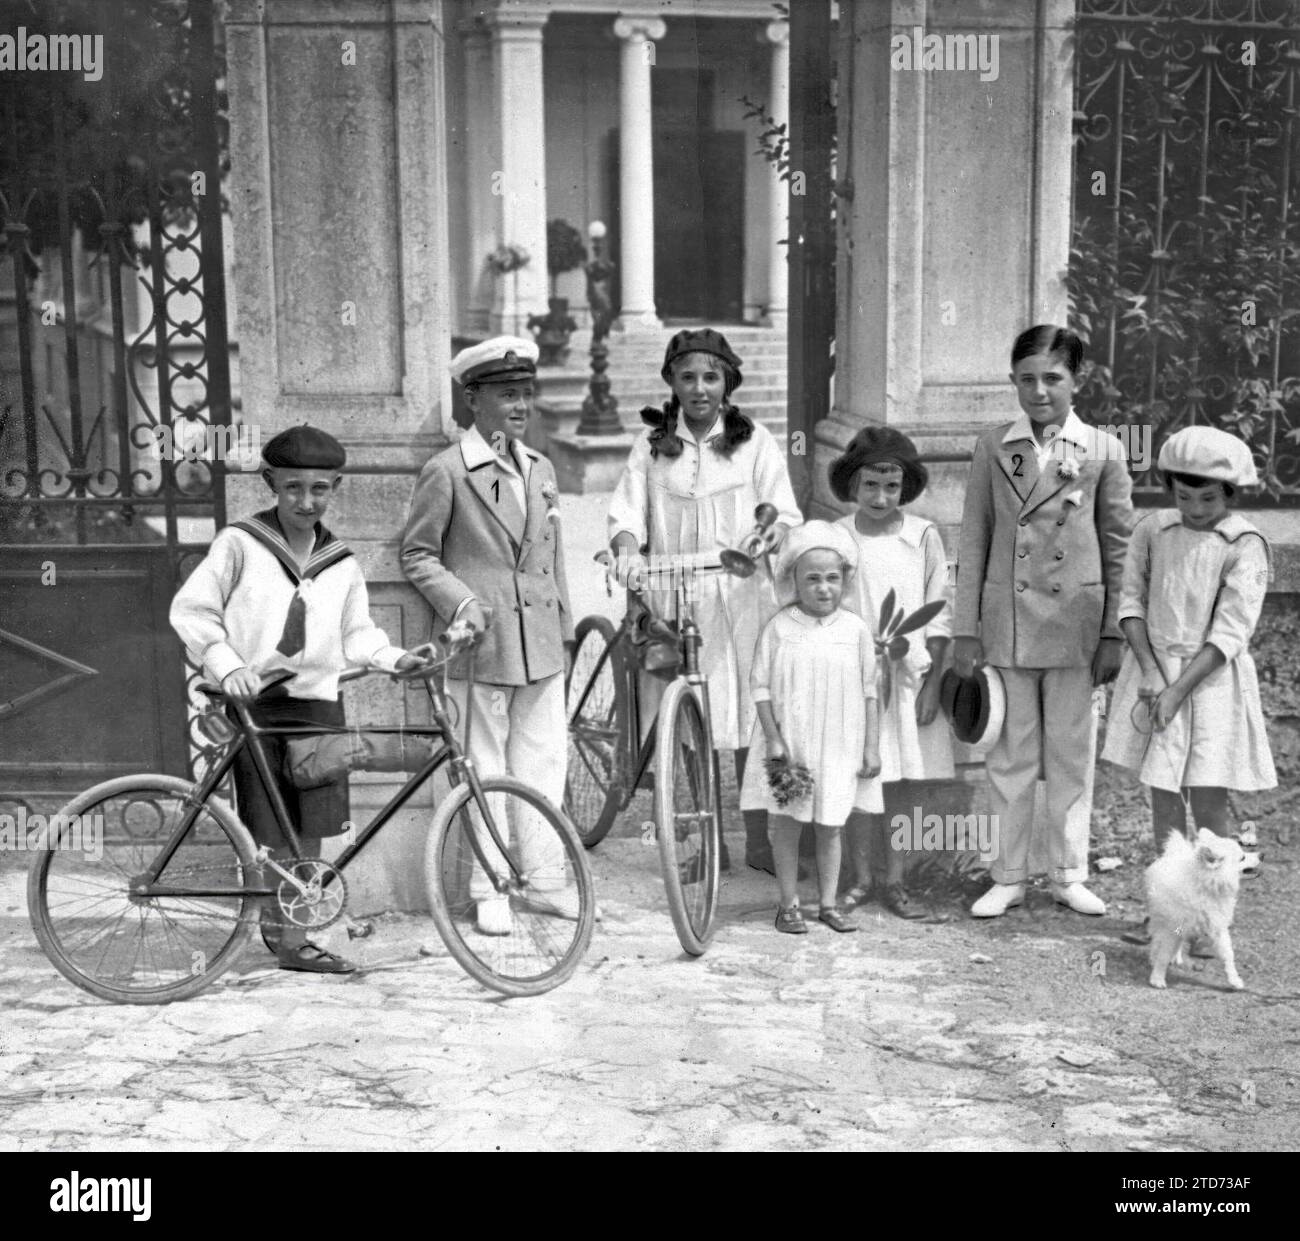 07/31/1918. The Royal family's summer vacation. Ss.Aa. the Prince of Asturias (1) and the Infante Don Jaime (2), with the Children of the Infante Don Carlos, in front of the latter's palace. Credit: Album / Archivo ABC / Ramón Alba Stock Photo